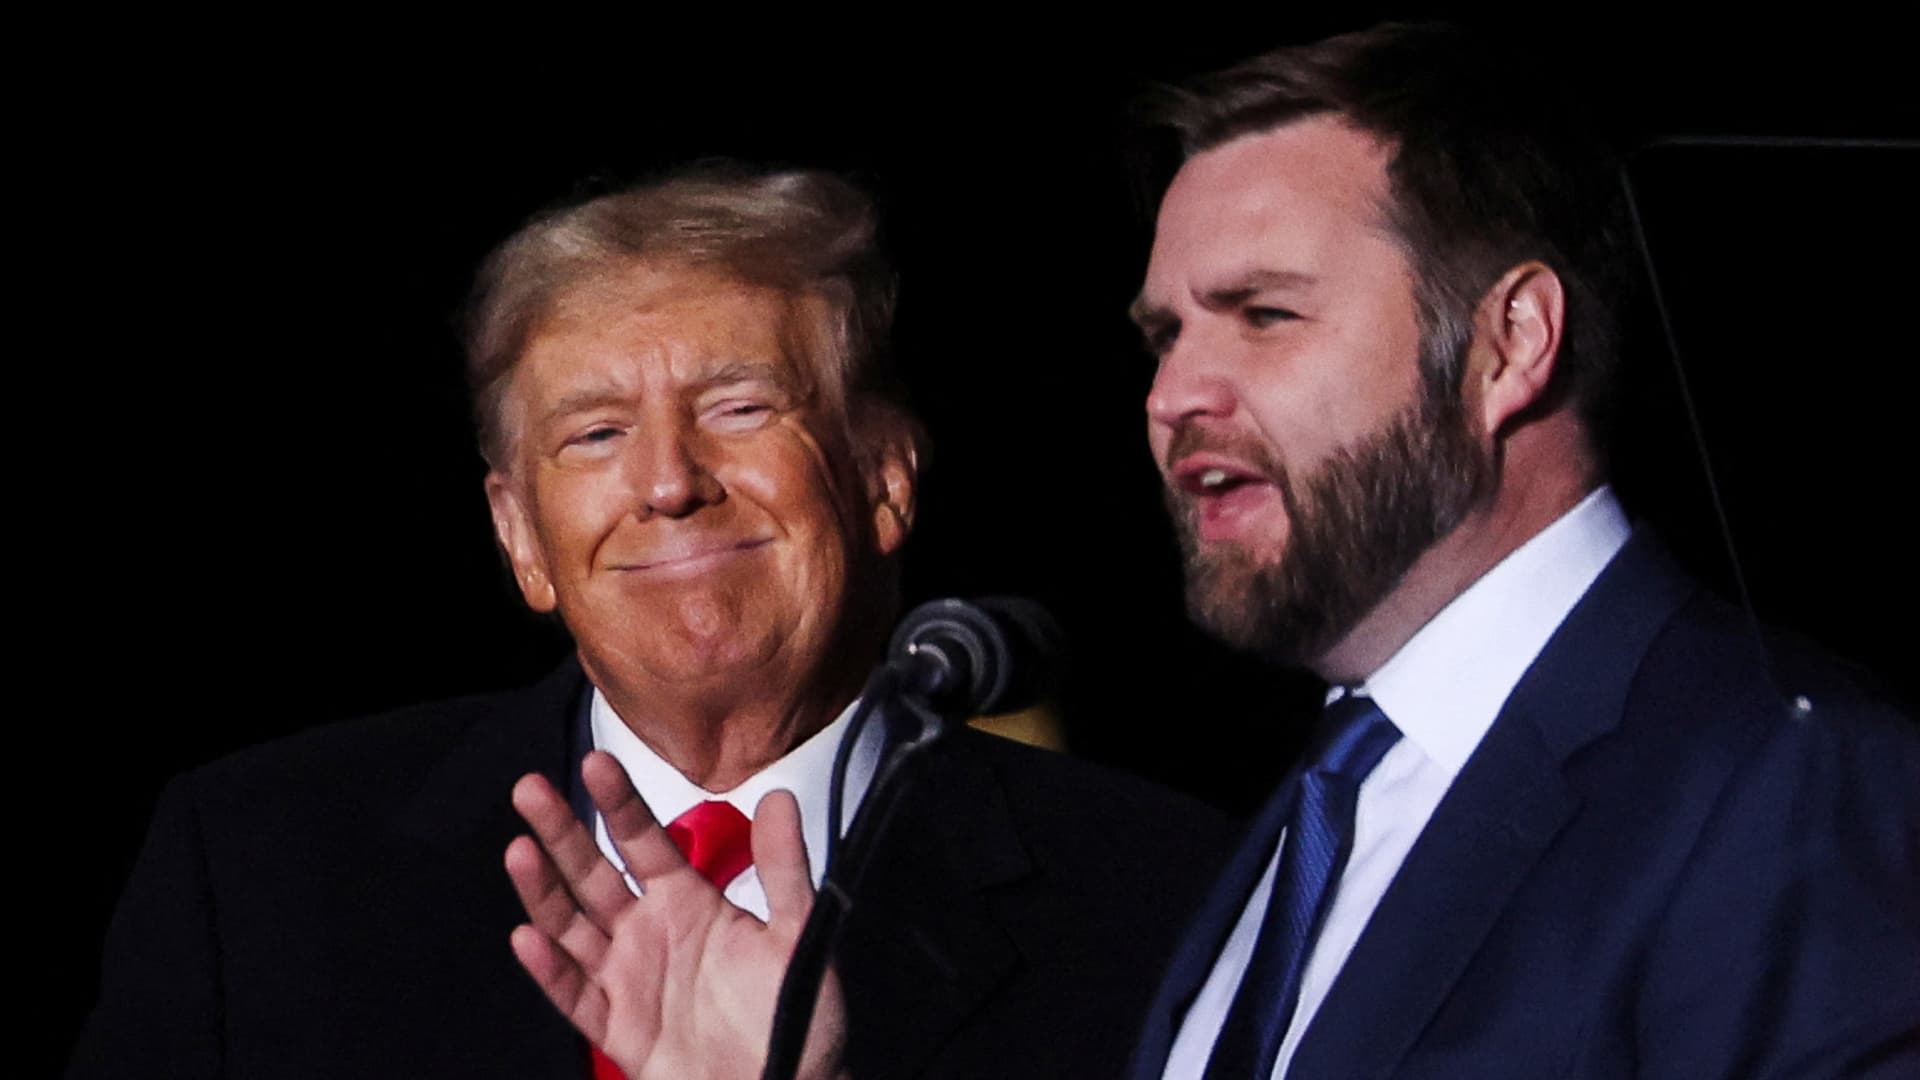 U.S. Senate Republican candidate J.D. Vance speaks as former U.S. President Donald Trump smiles at a rally to support Republican candidates ahead of midterm elections, in Dayton, Ohio, U.S. November 7, 2022. 